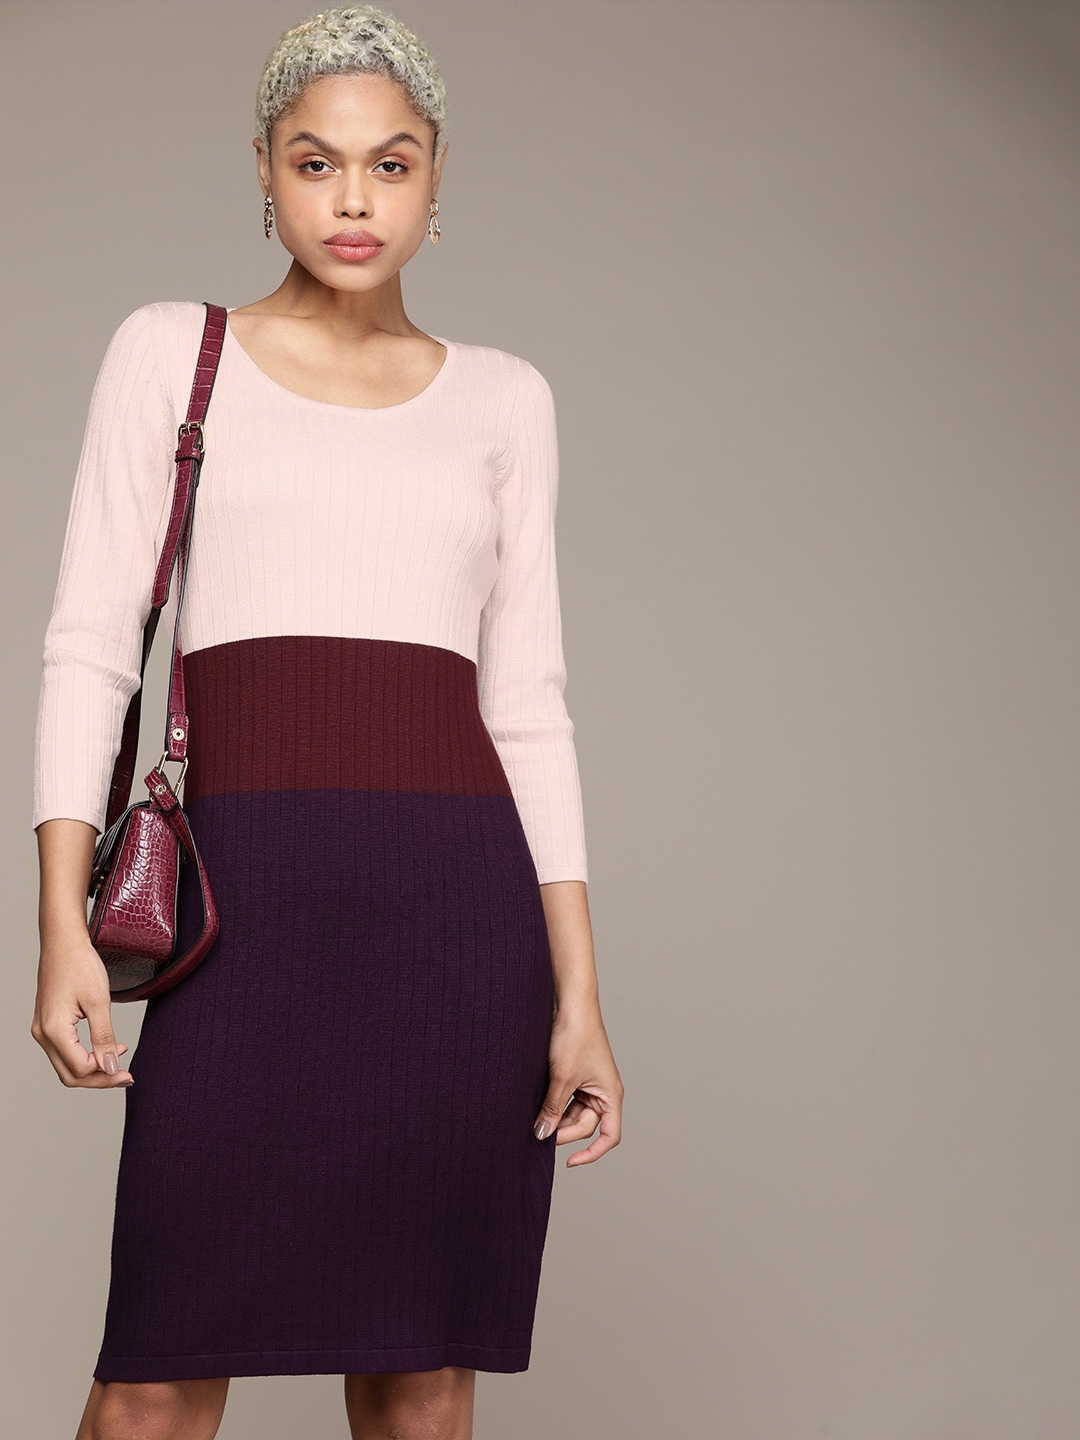 Calvin Klein Jeans Pink & Maroon Colourblocked Casual Sweater Dress Price  in India, Full Specifications & Offers 